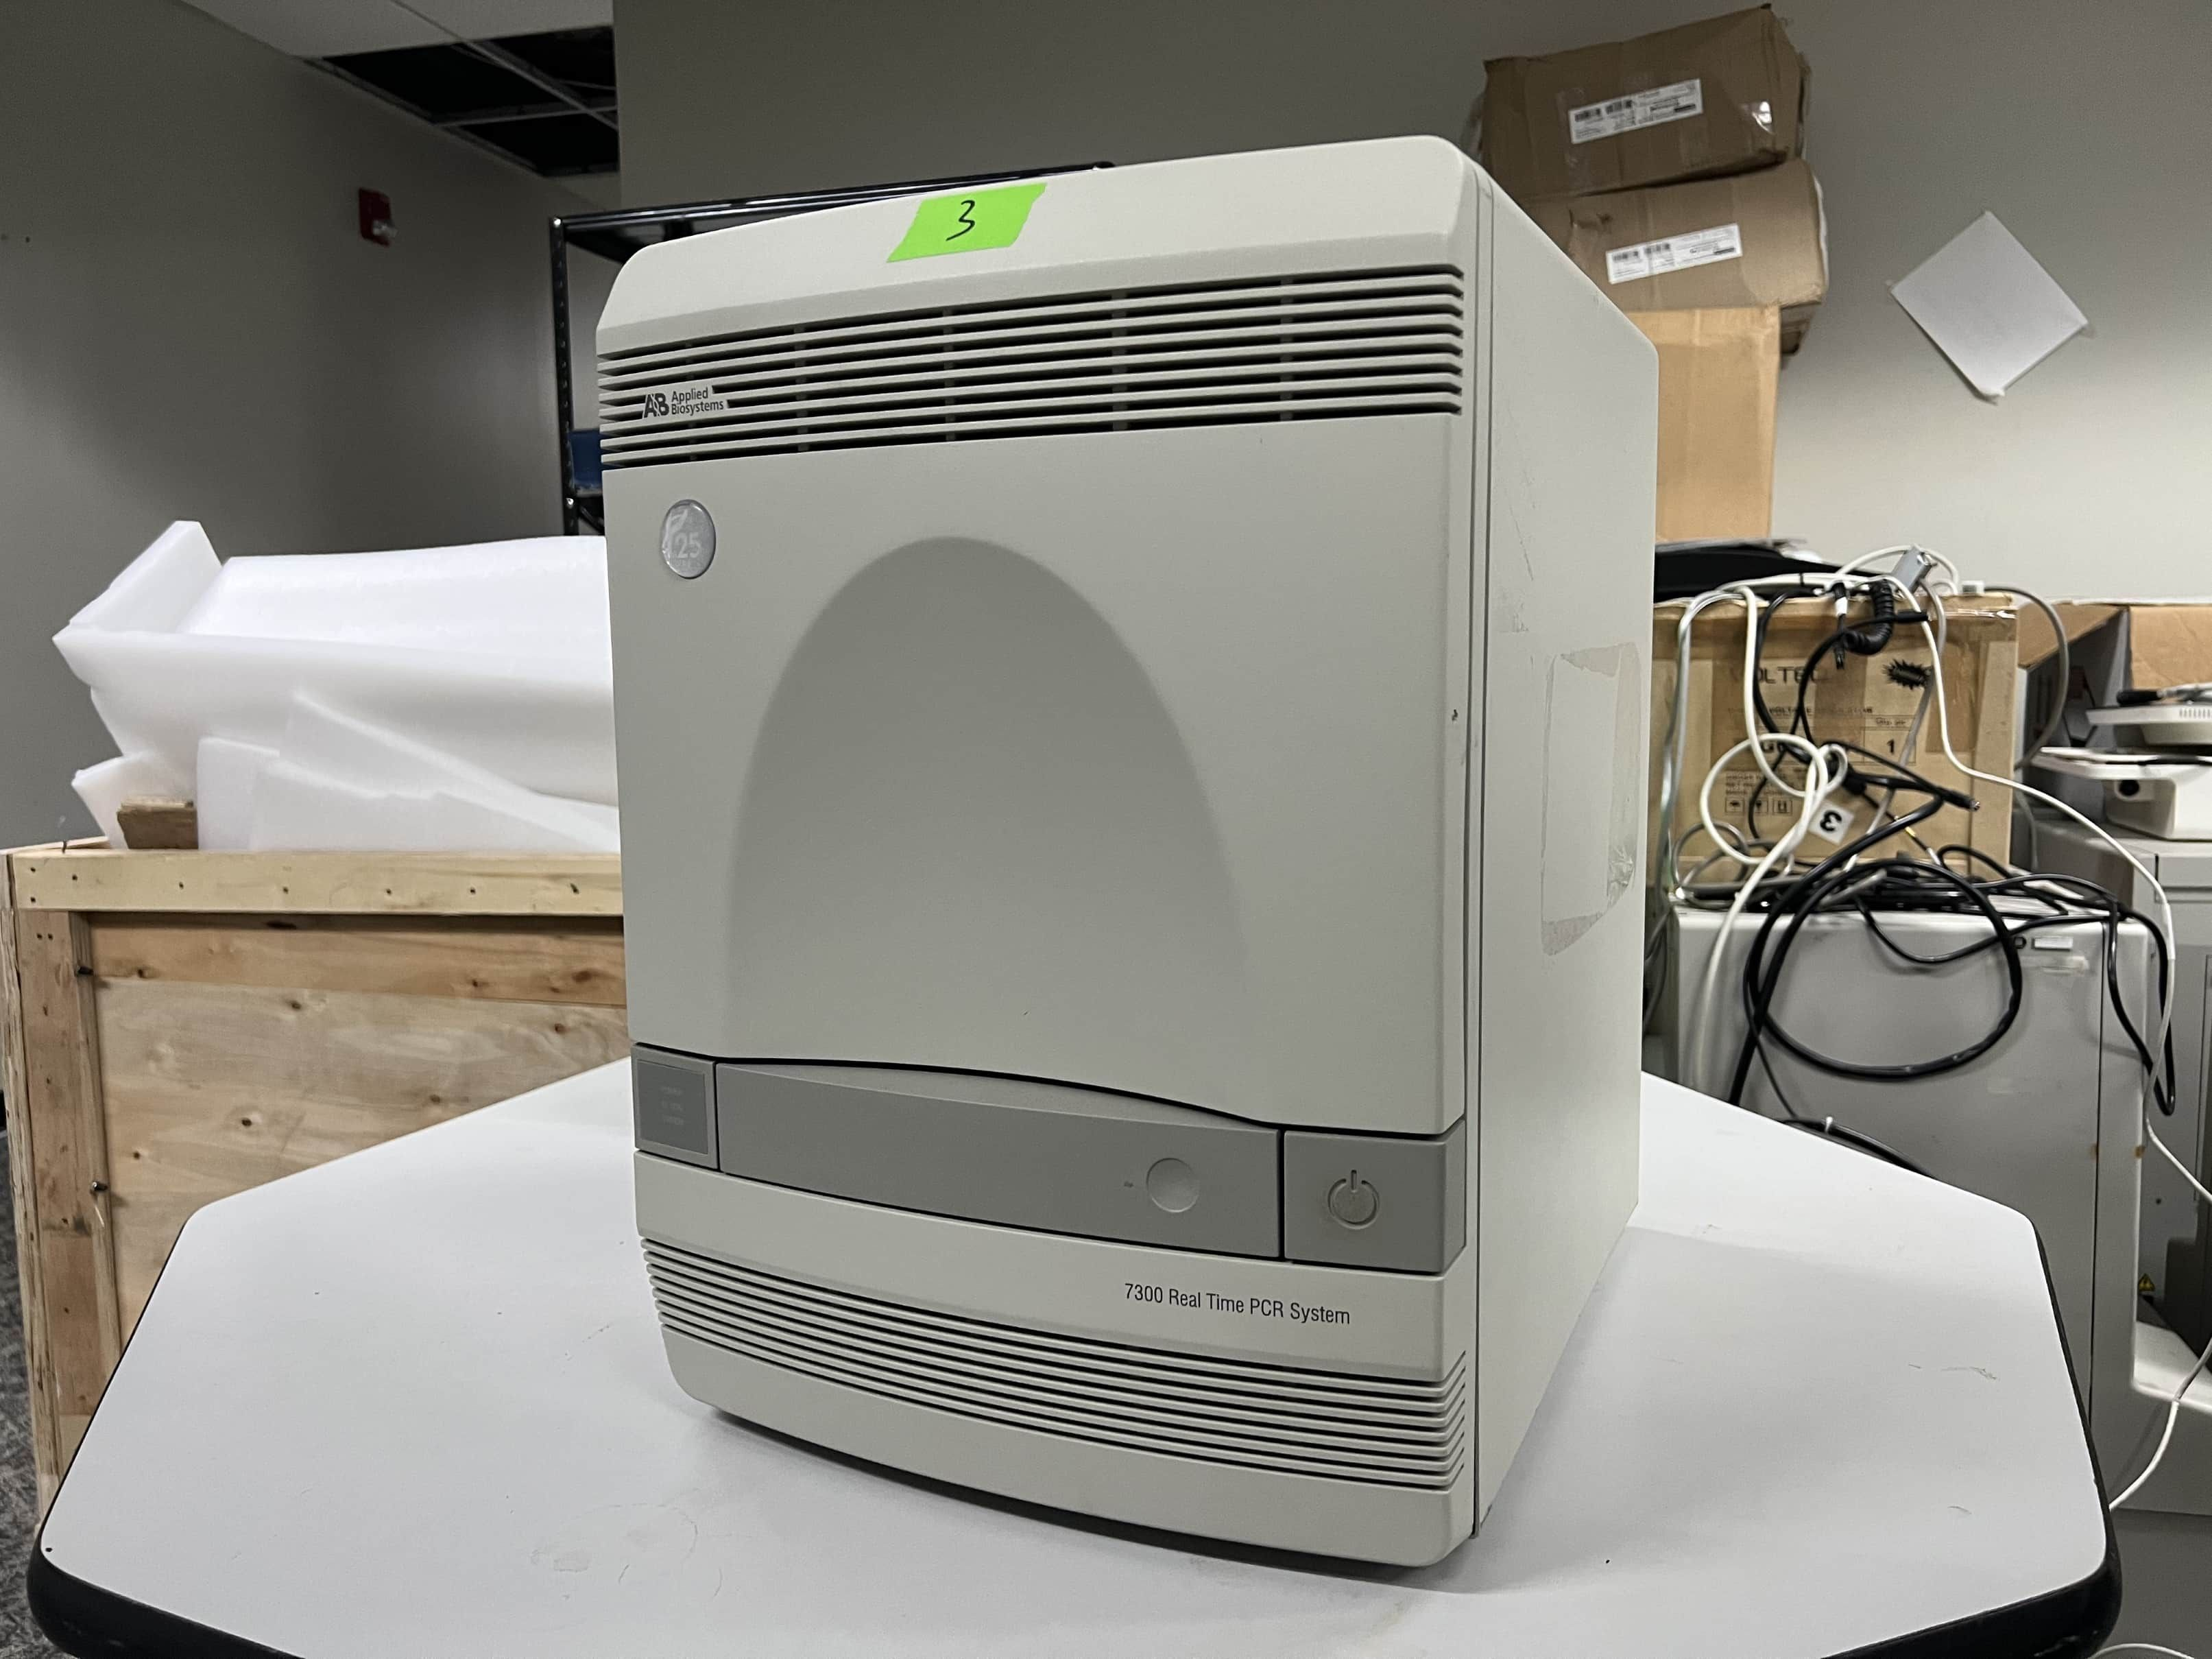 REFURBISHED Applied Biosystems 7300 Real Time PCR